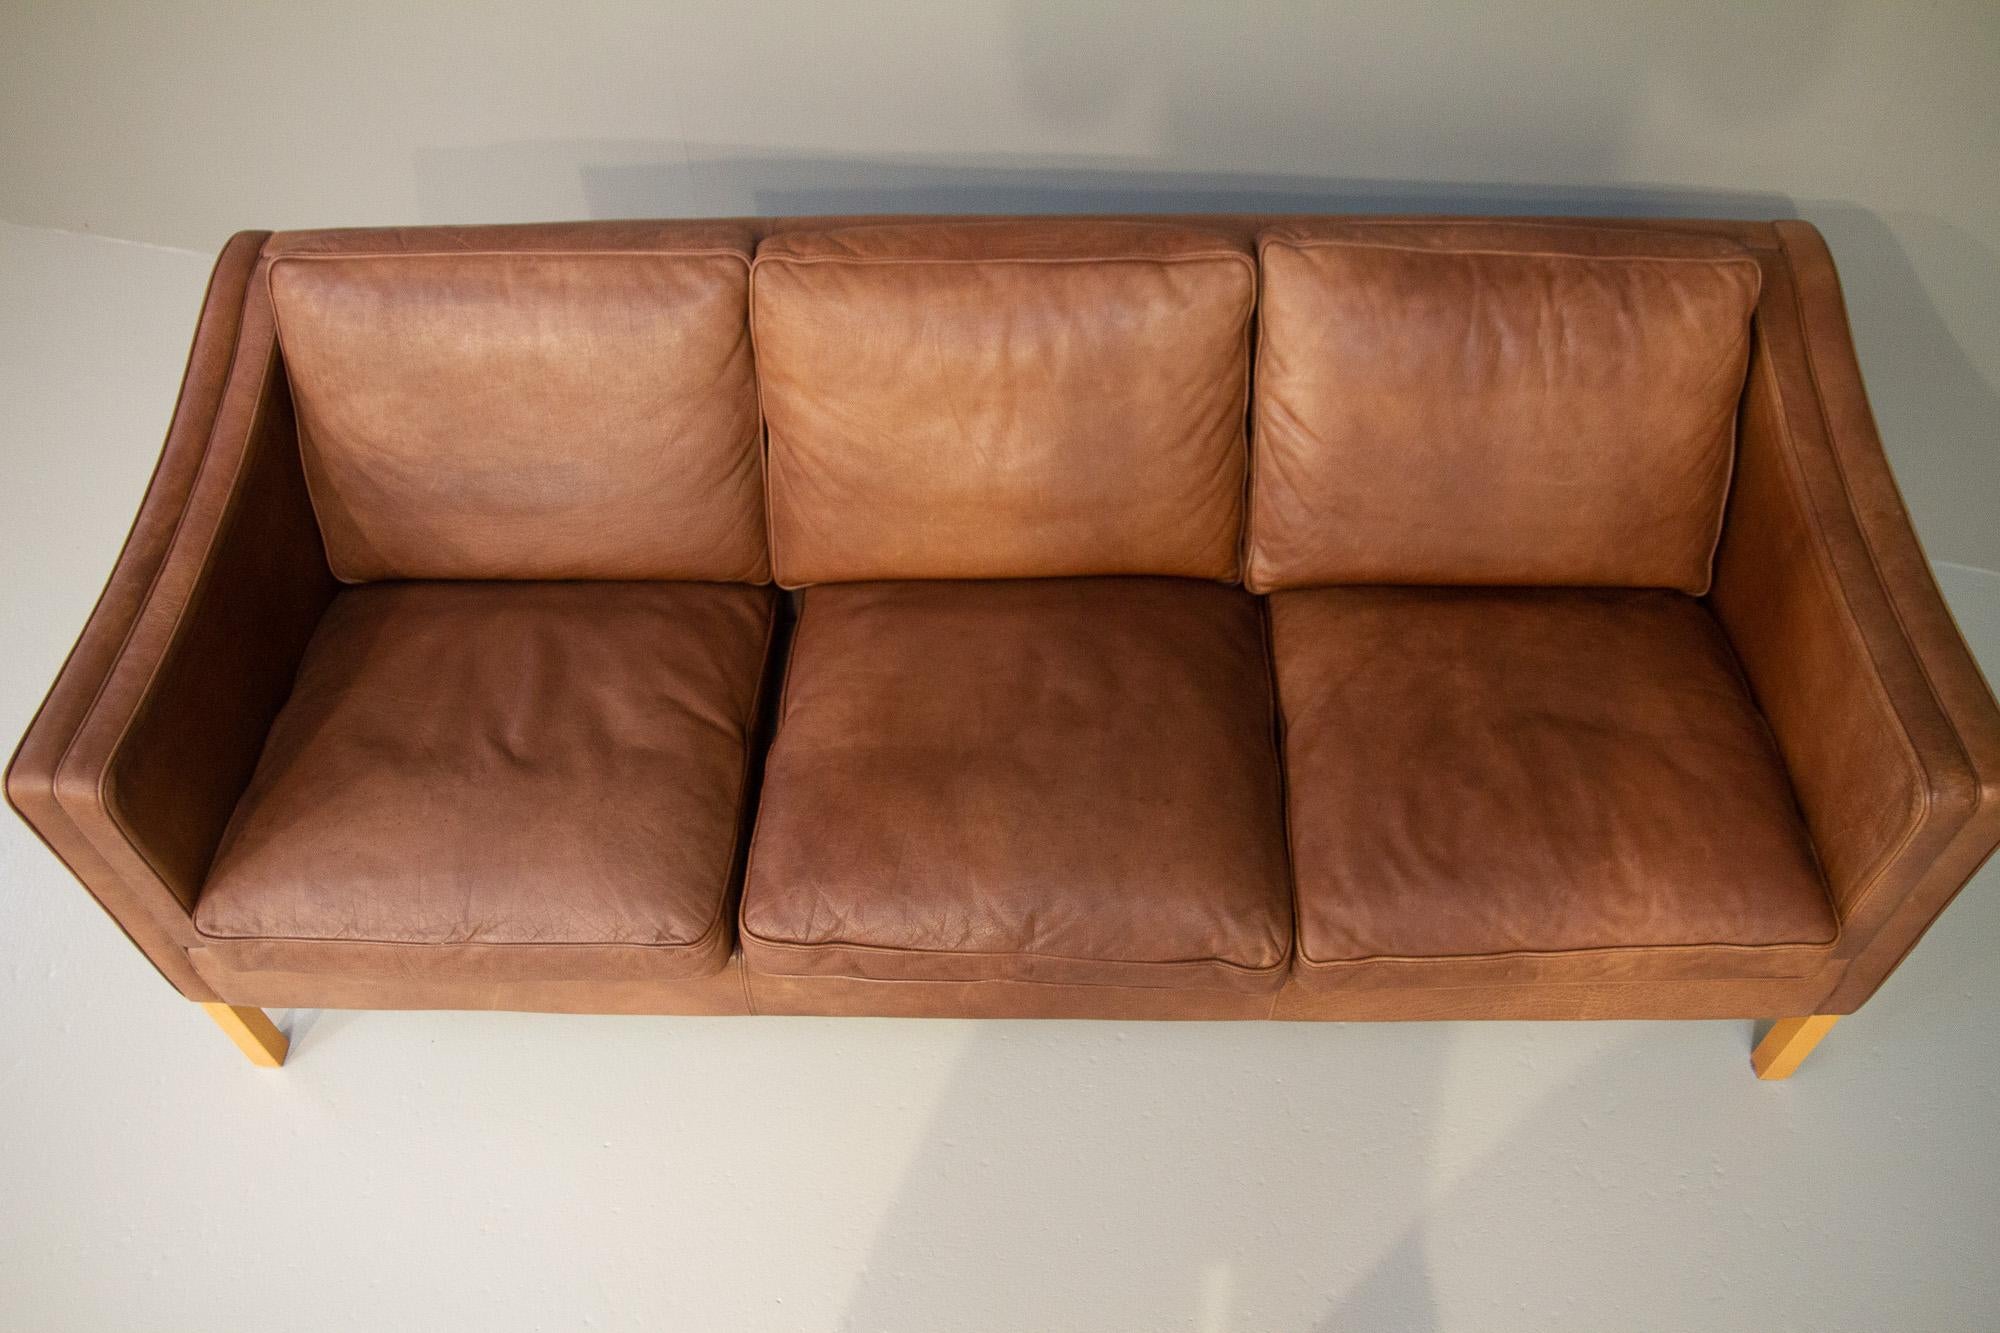 Vintage Danish Leather 3-Seater Sofa by Stouby, 1980s. 3